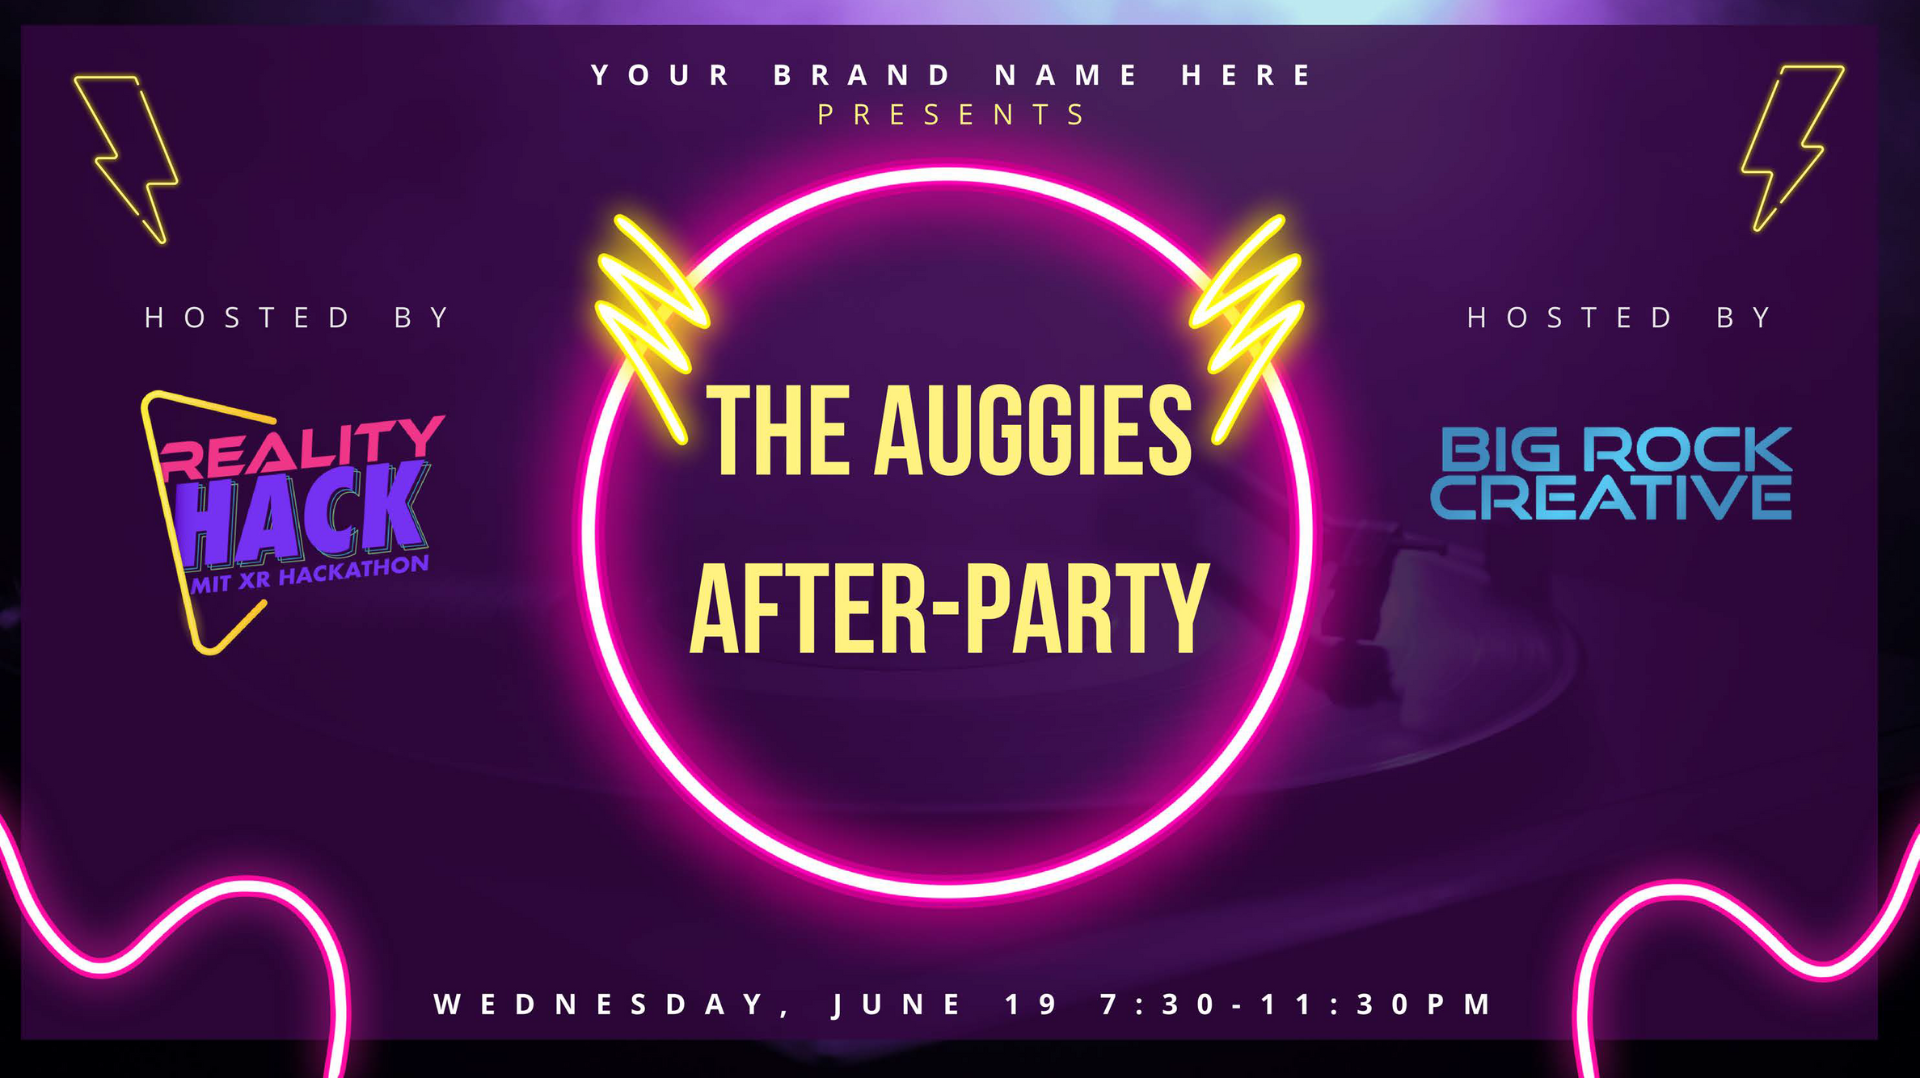 BE A PART OF THE AUGGIES AFTER-PARTY AT AWE